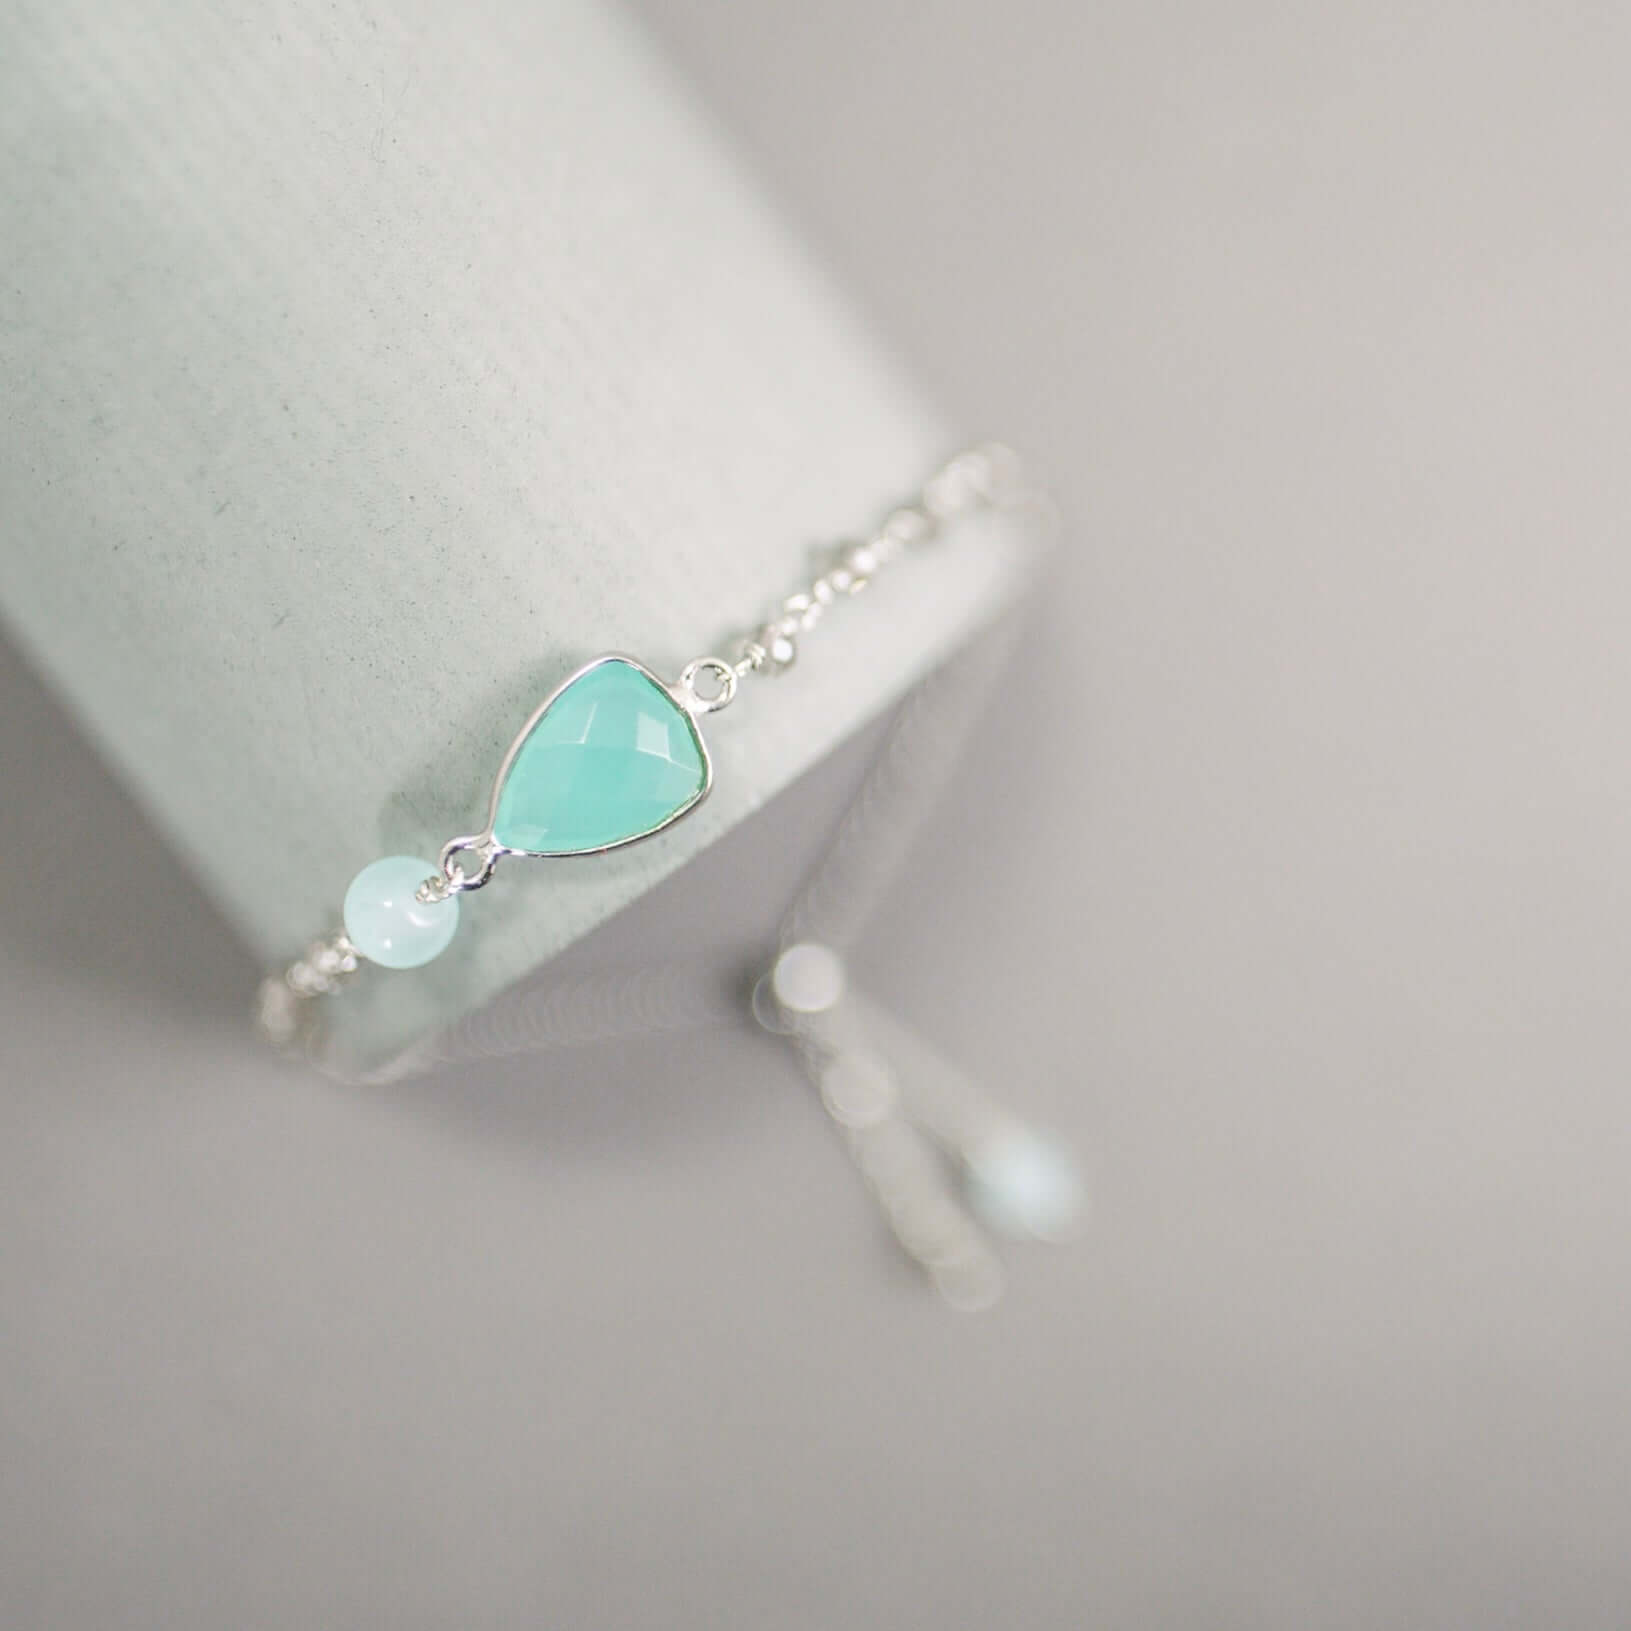 Adjustable and Stackable Bracelet with Aqua Chalcedony Stone